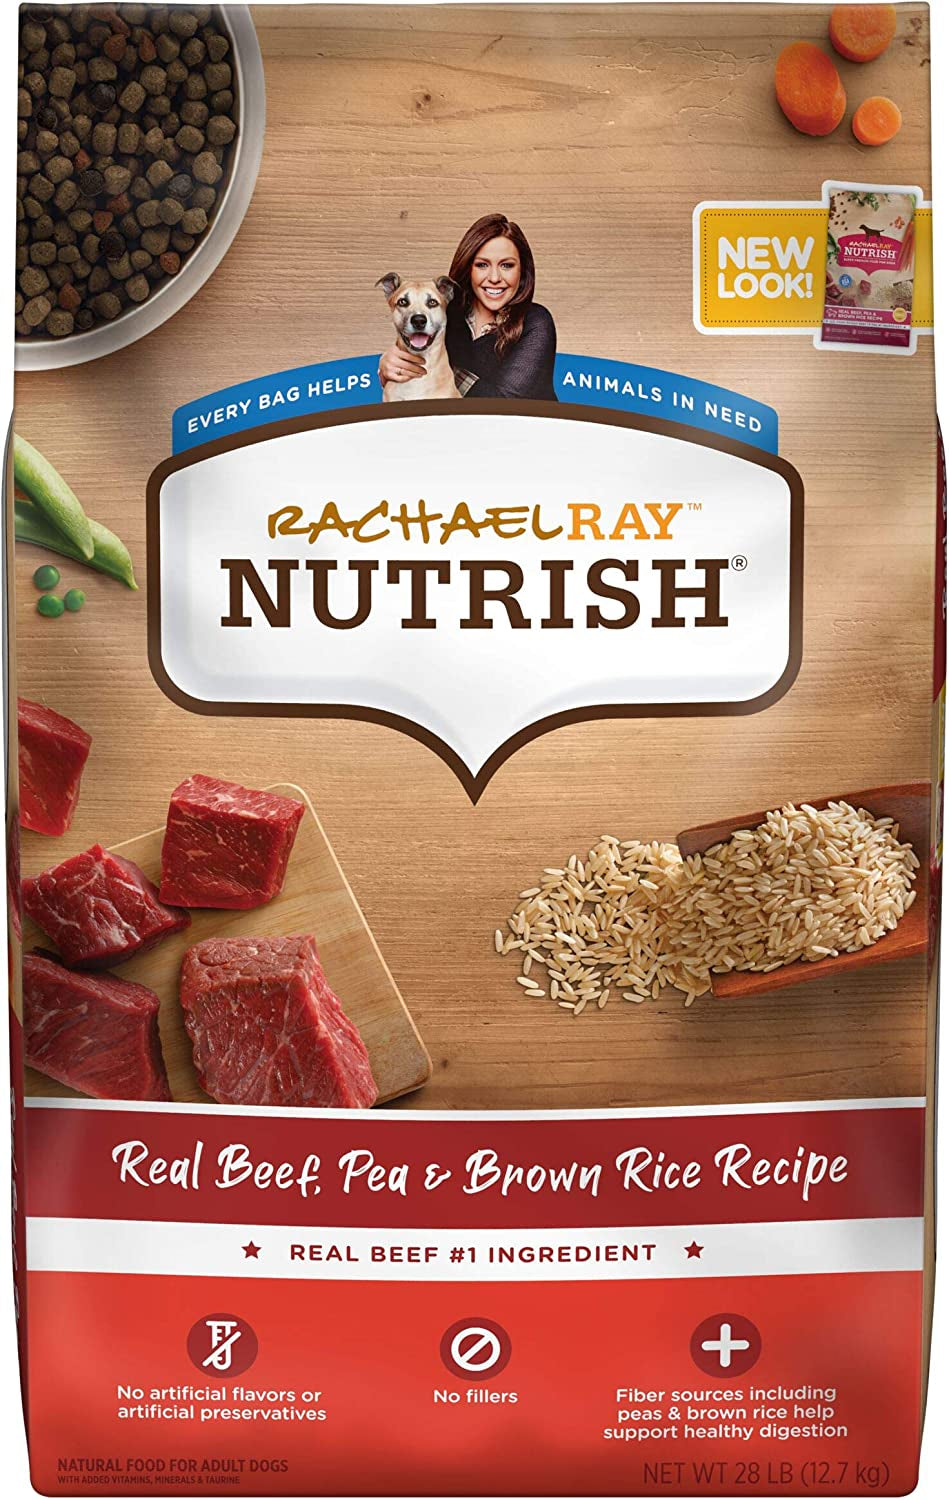 Rachael Ray Nutrish Premium Natural Dry Dog Food, Real Beef, Pea, & Brown Rice Recipe, 28 Pounds